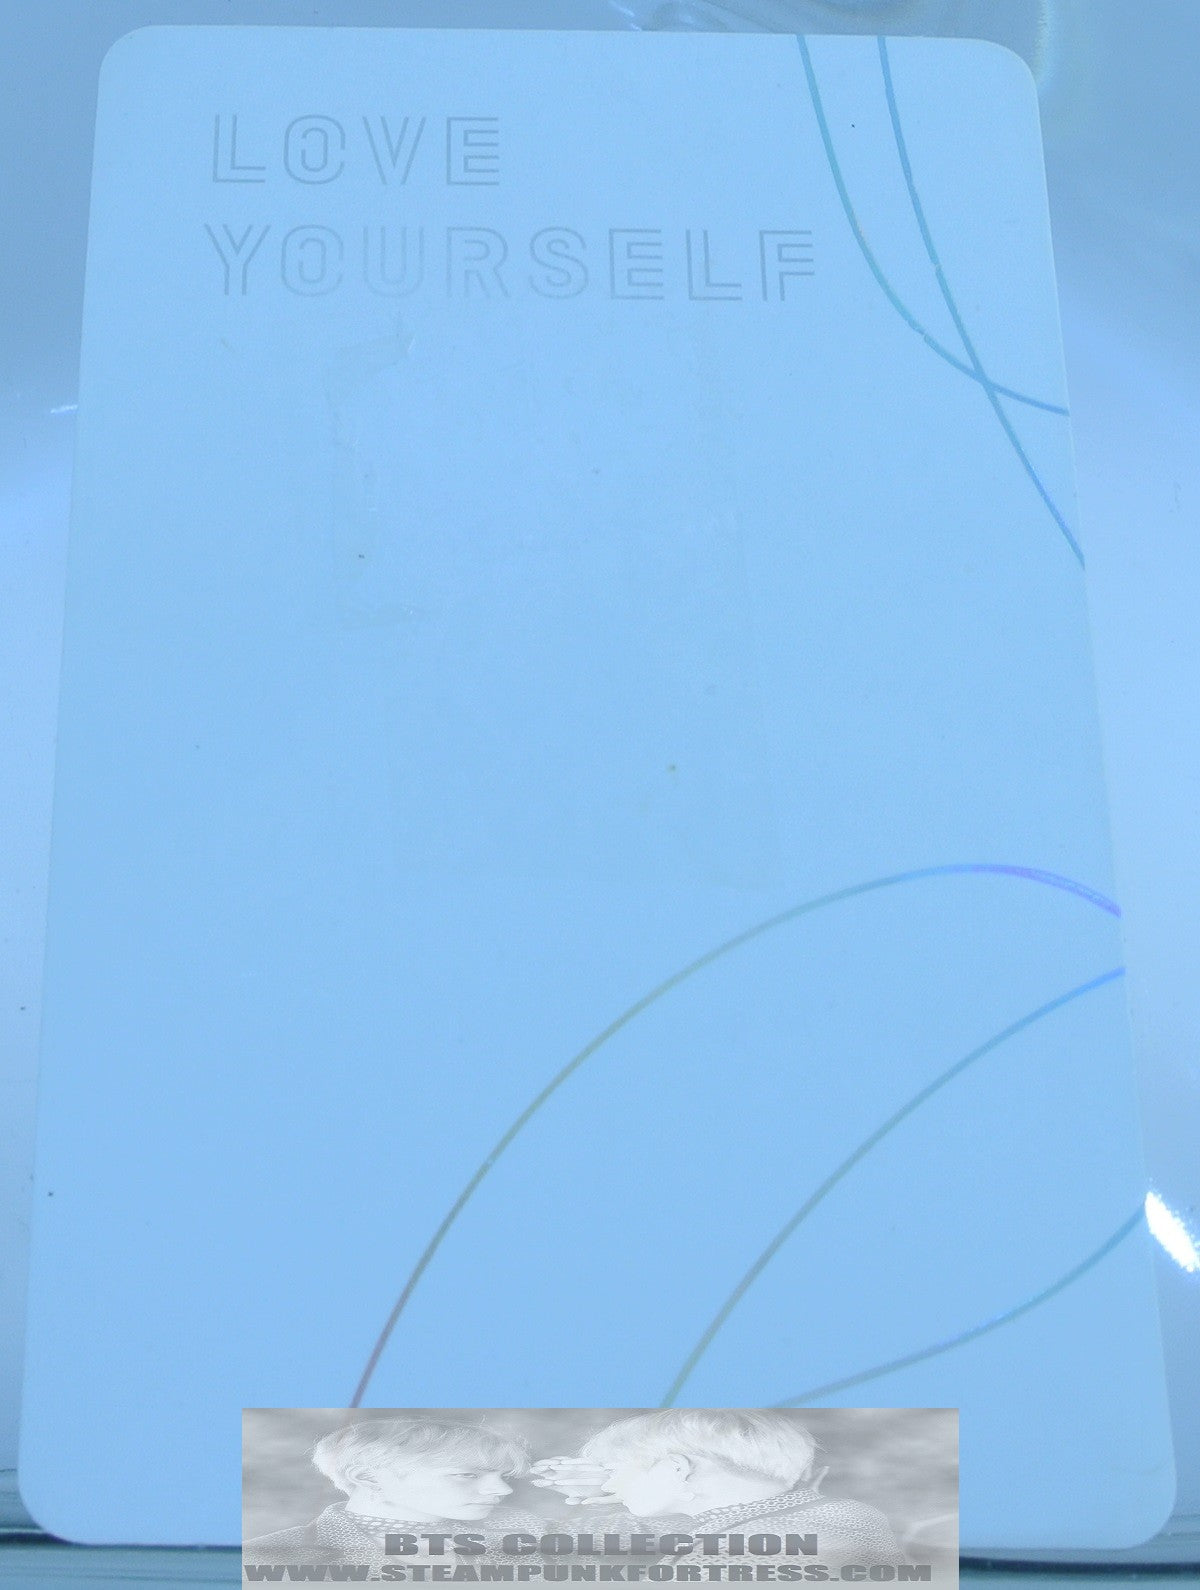 BTS J-HOPE JUNG HOSEOK LOVE YOURSELF HER VERSION O PHOTOCARD PHOTO CARD OFFICIAL MERCHANDISE